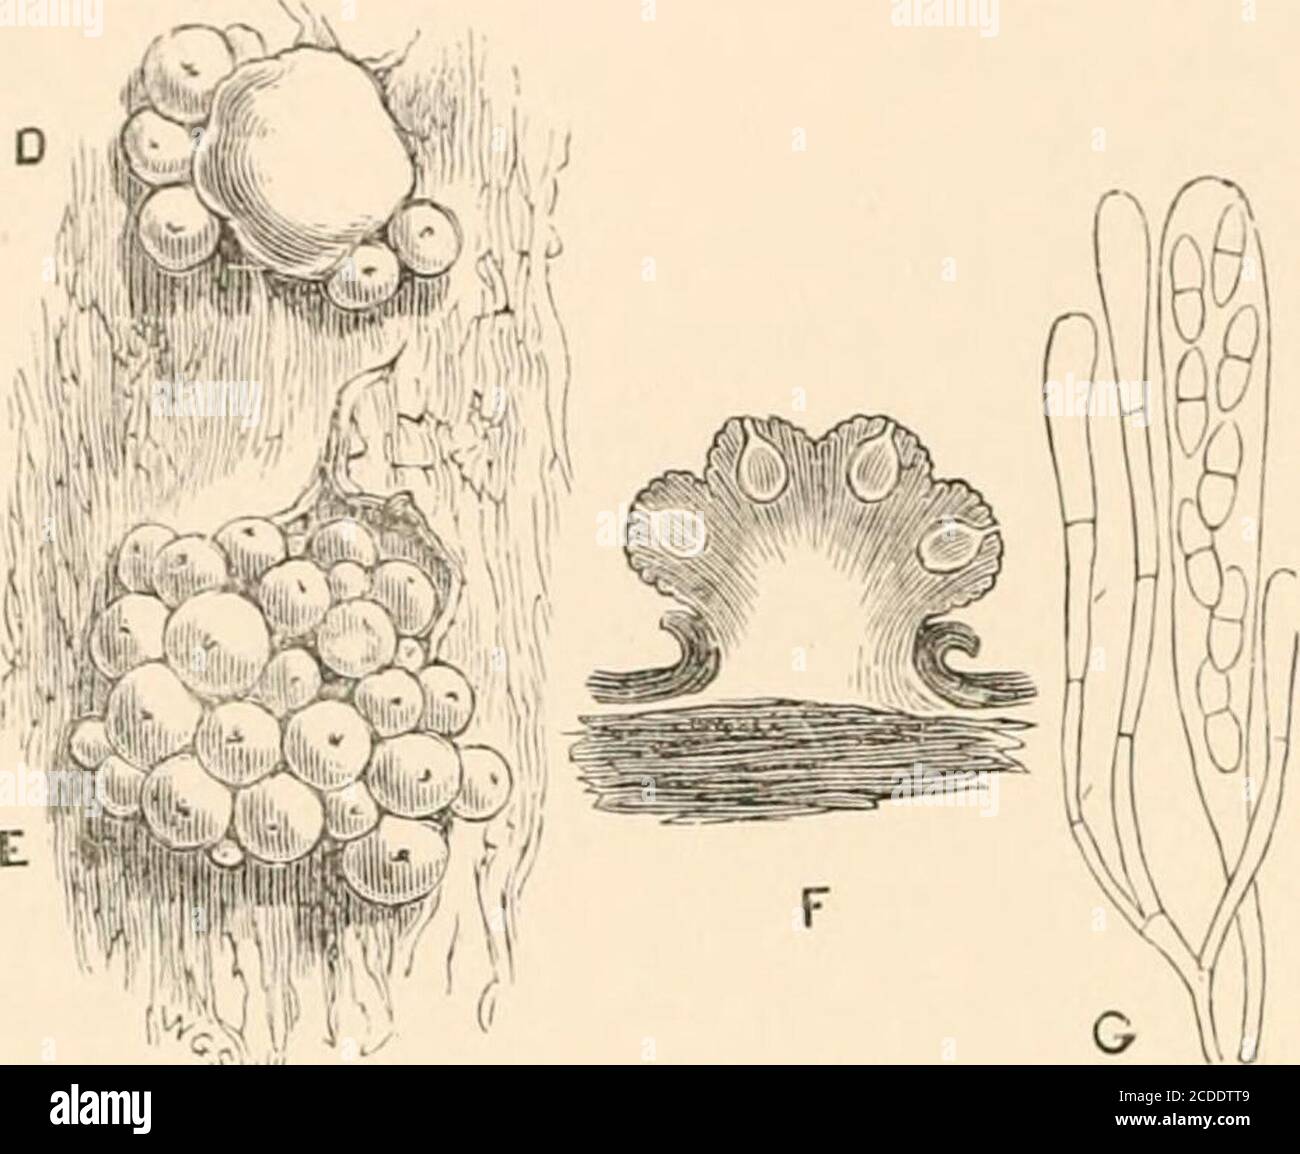 . Introduction to the study of fungi, their organography, classification, and distribution for the use of collectors . formerly unitedwith Nedria, have theperithecia seated upona more or less byssoidsubiculum; these arenow separated from that genus, and united under the nameof Byssonedria, analogous to the Byssosphacria of theSpliaeriaceae. In another group, the perithecia, which resembleNedria, are densely gregarious, and often partially immersedin a velvety subiculum, transformed from the tissues ofdecaying Fungi. This genus is Hypomyccs, each species ofwhich has also a conidial form, which Stock Photo